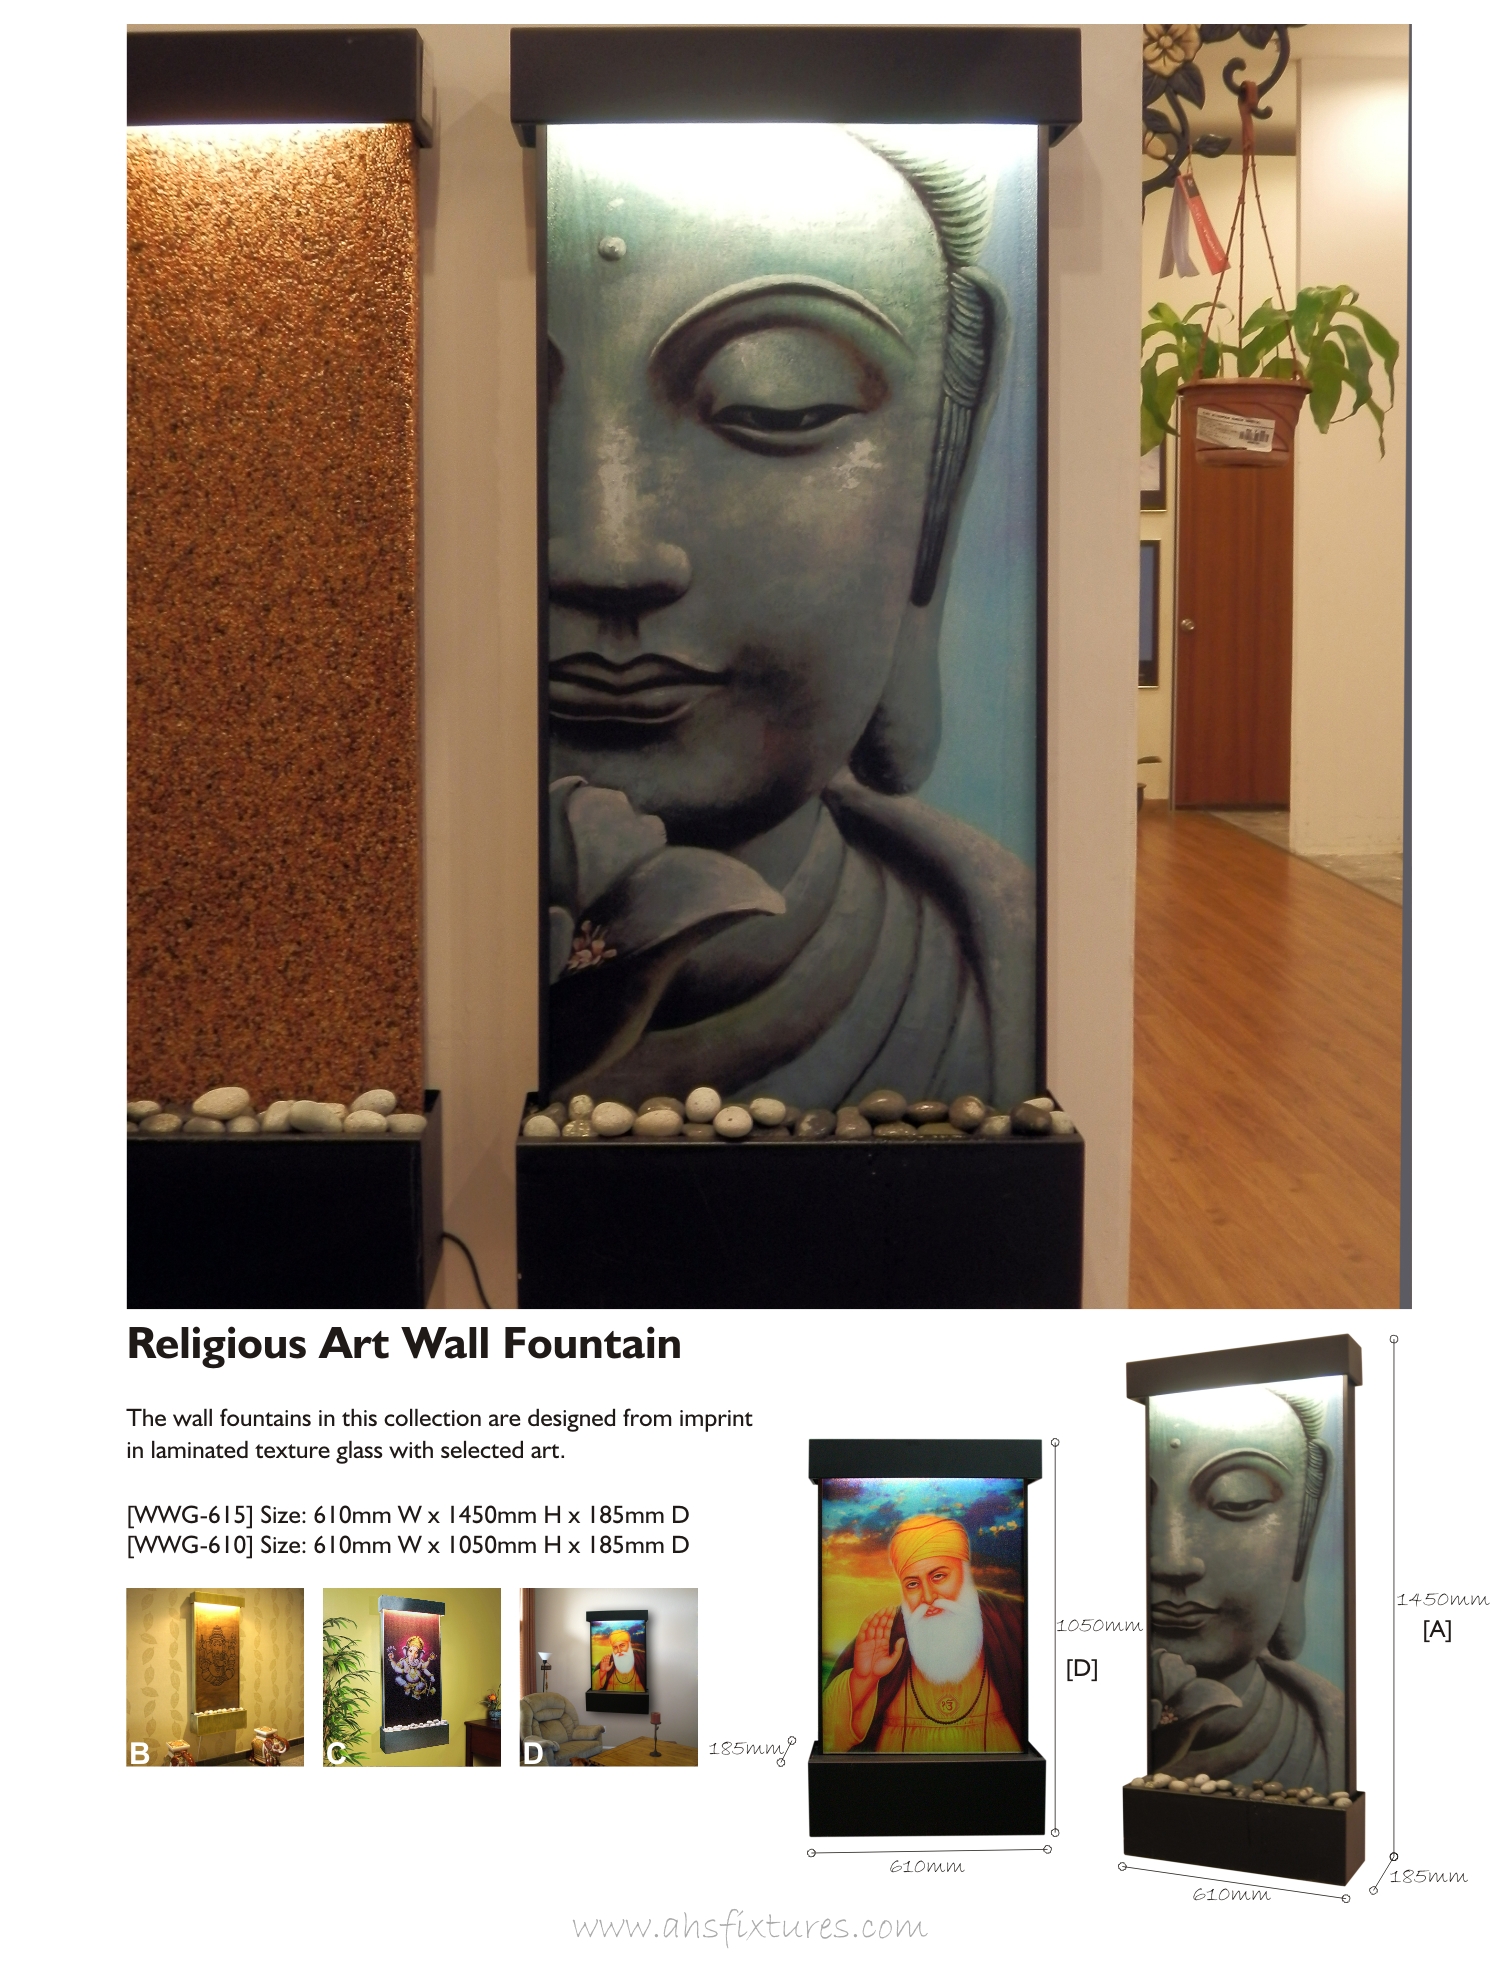 WWG-615 Religious Art Wall Fountains Water Features Made In Malaysia